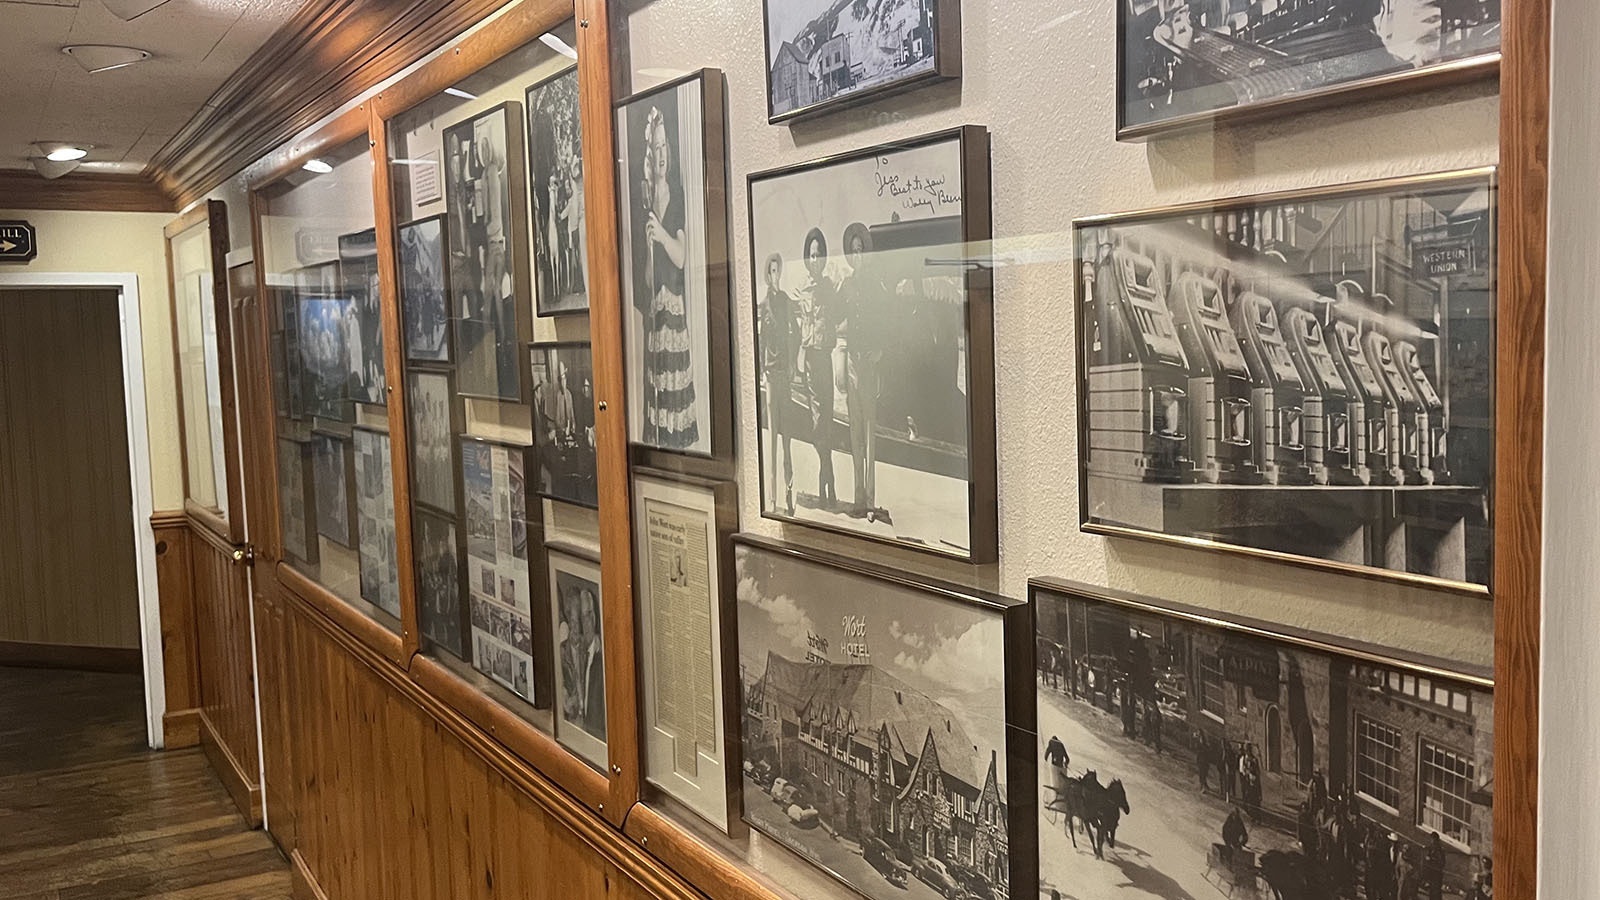 The walls at the Silver Dollar Bar in The Wort Hotel in Jackson, Wyoming, is a who's who of the past and present at the iconic watering hole.